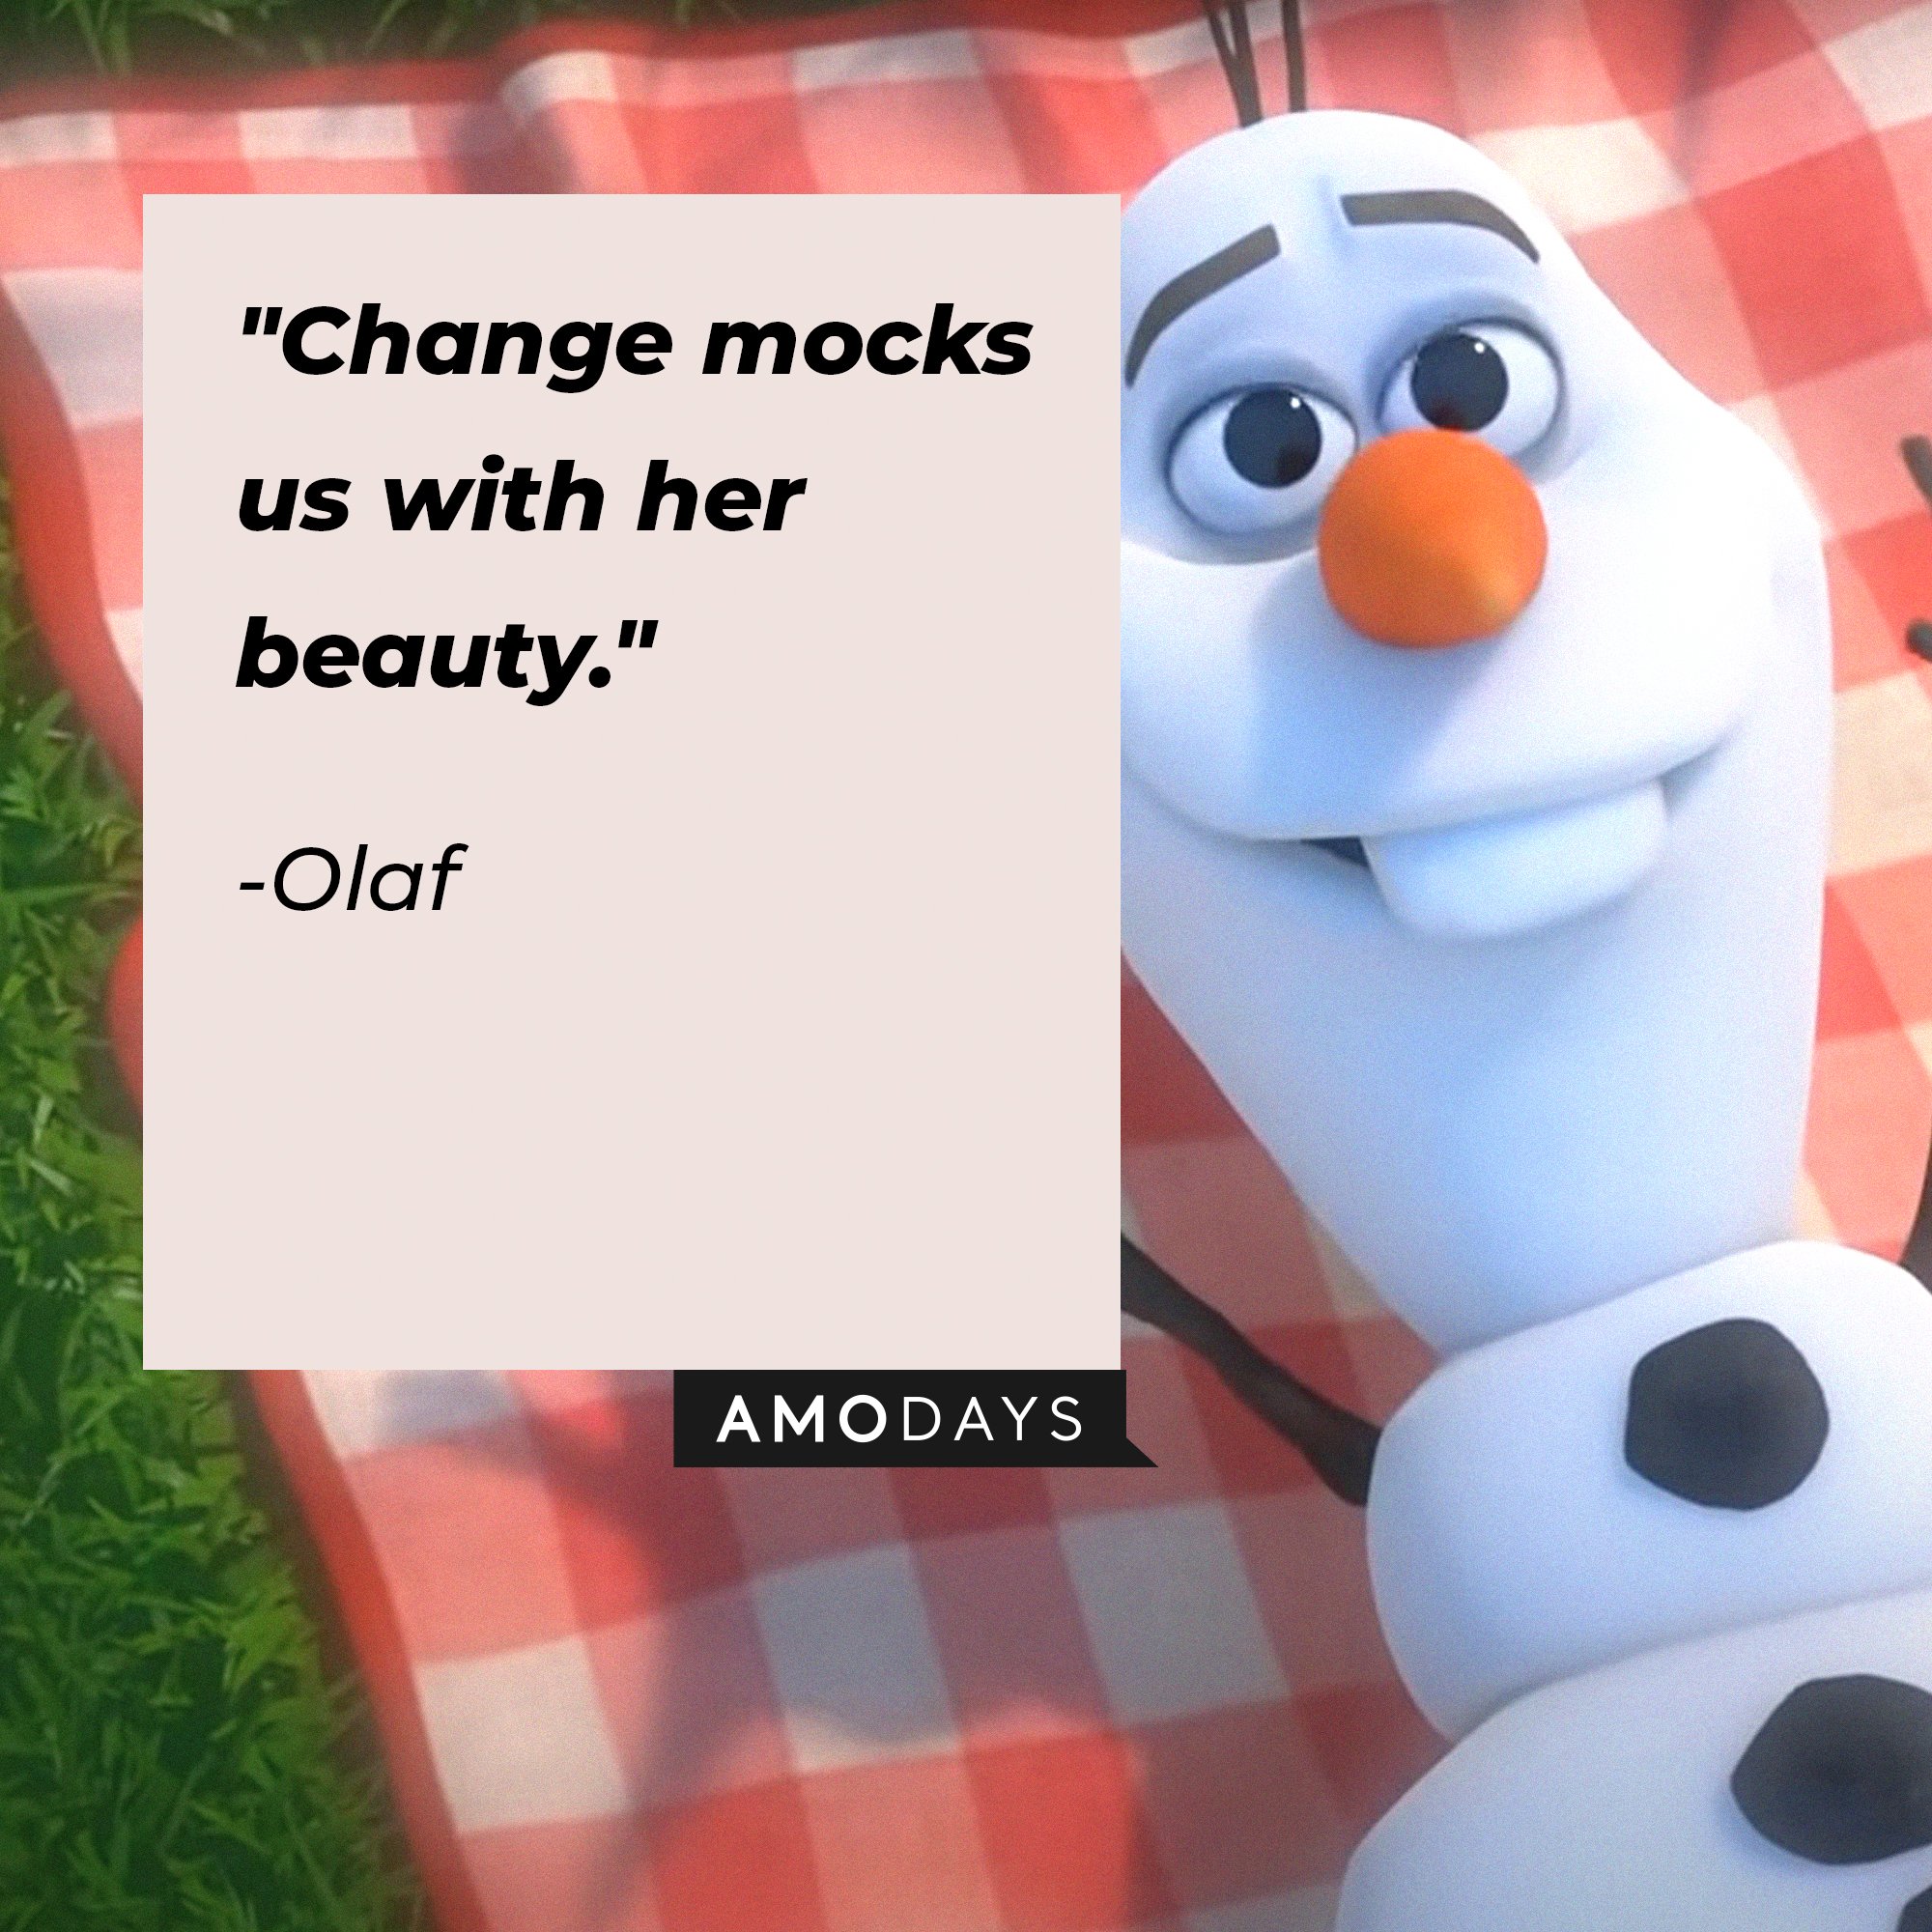 Olaf’s quote: "Change mocks us with her beauty." | Image: AmoDays